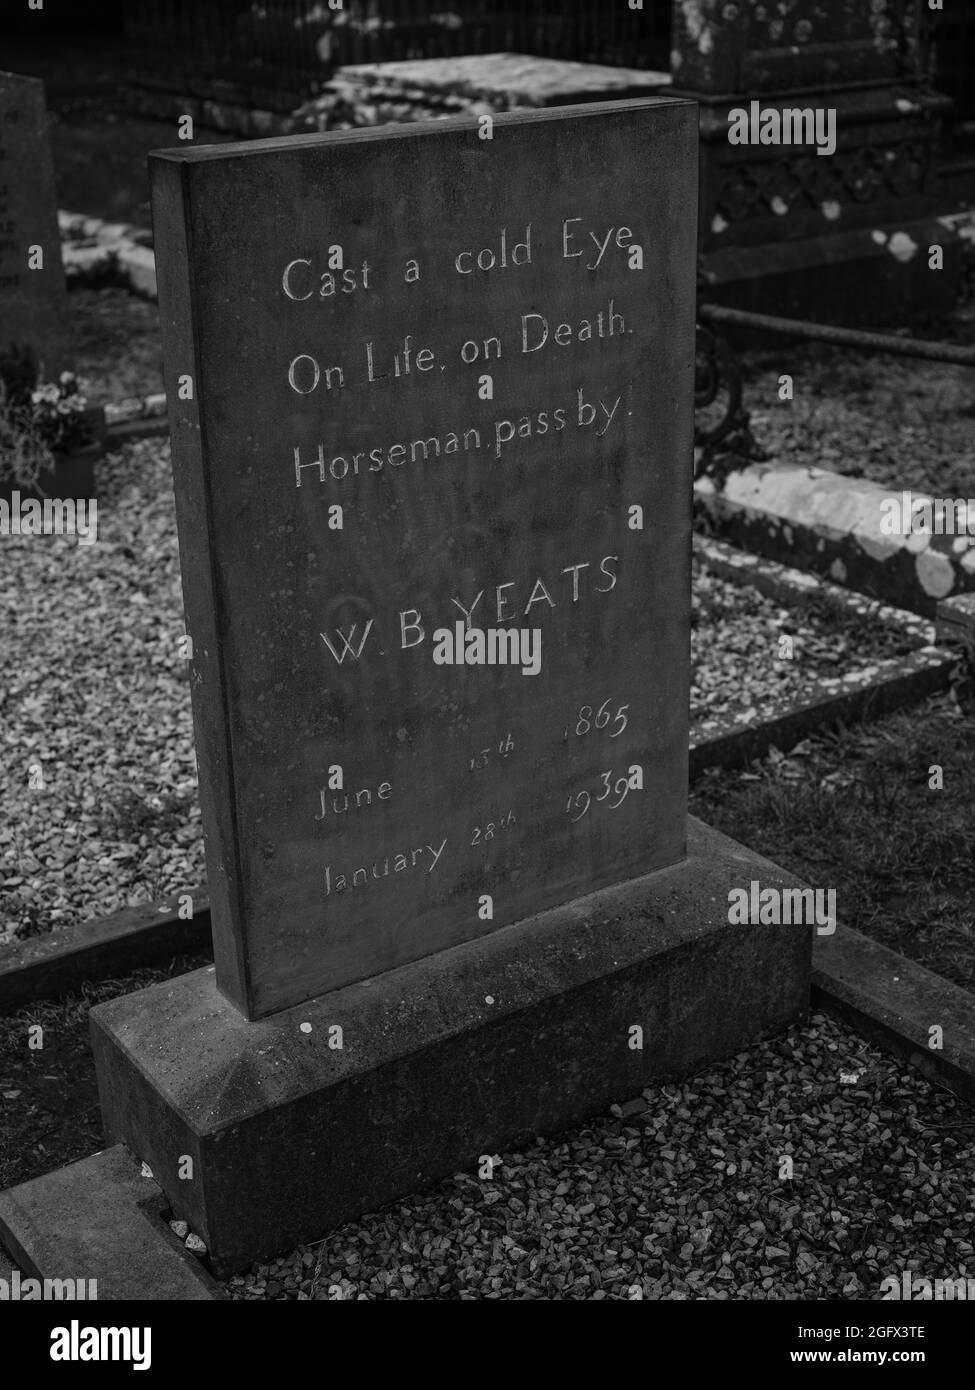 The headstone at the grave of W.B. Yeats in Sligo, Ireland, engraved with the line Cast a cold Eye On Life, on Death. Horseman, pass by! Stock Photo